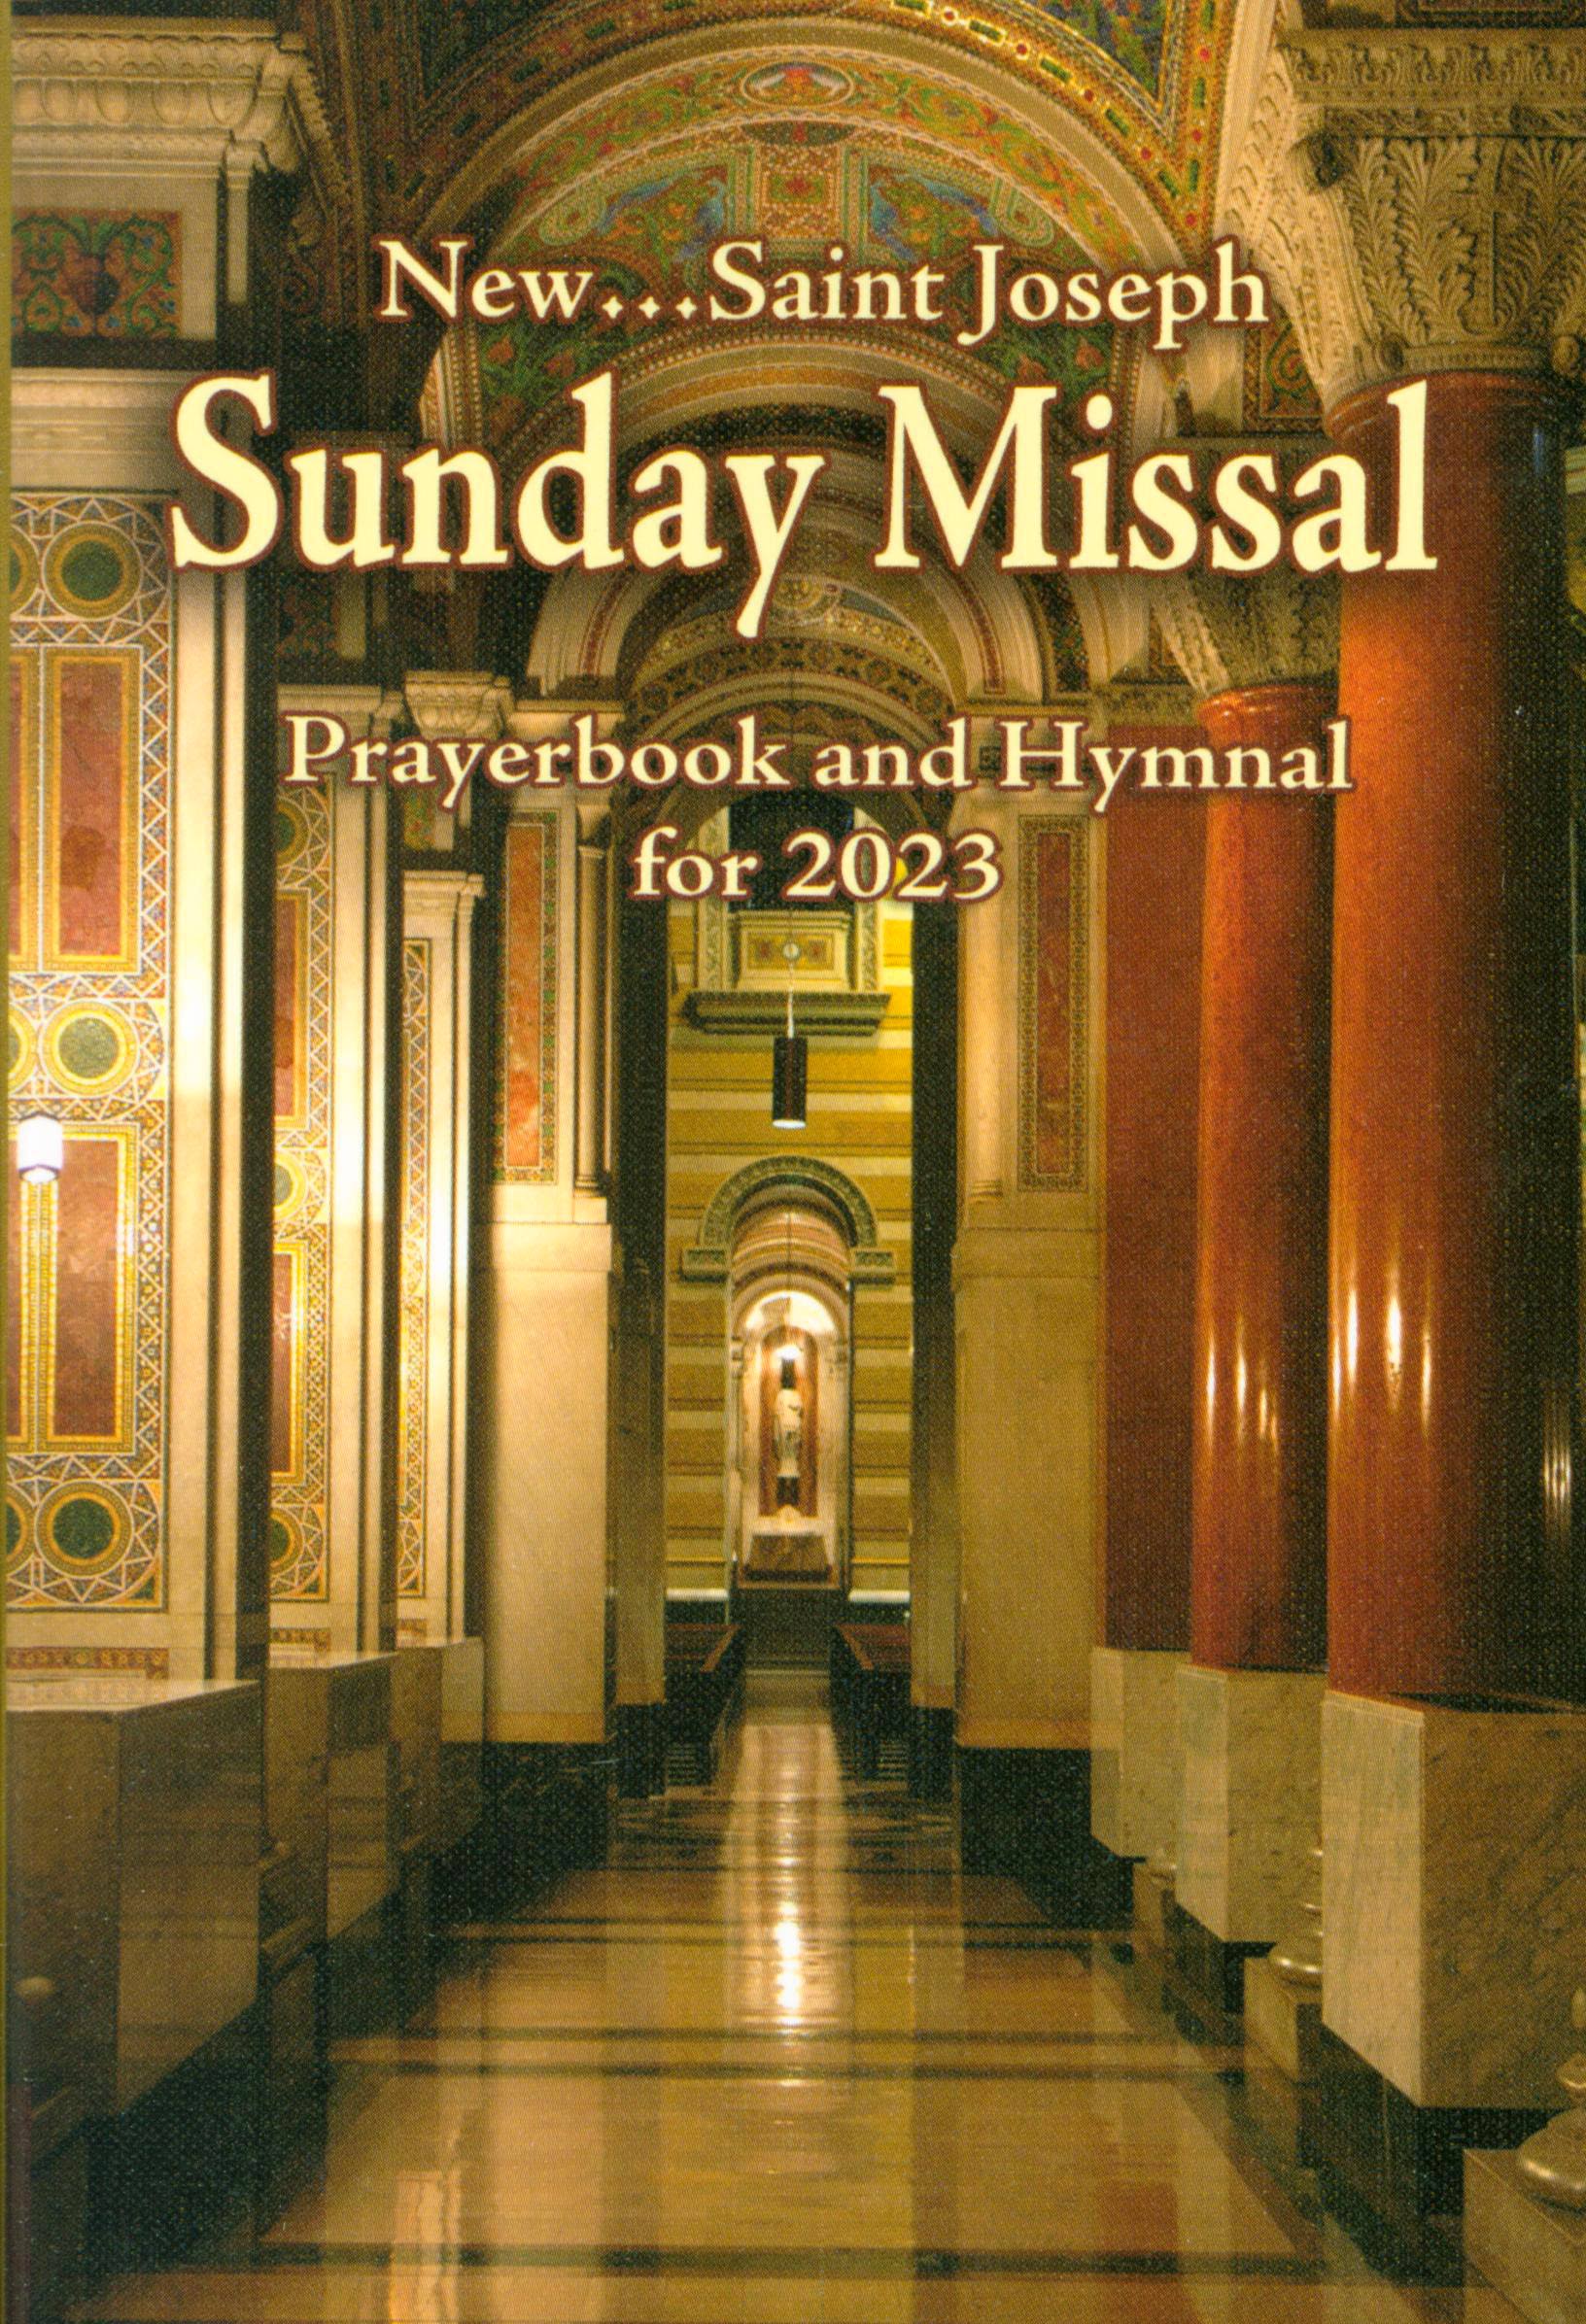 St. Joseph Sunday Missal Prayerbook and Hymnal for 2023: American Edition [Book]